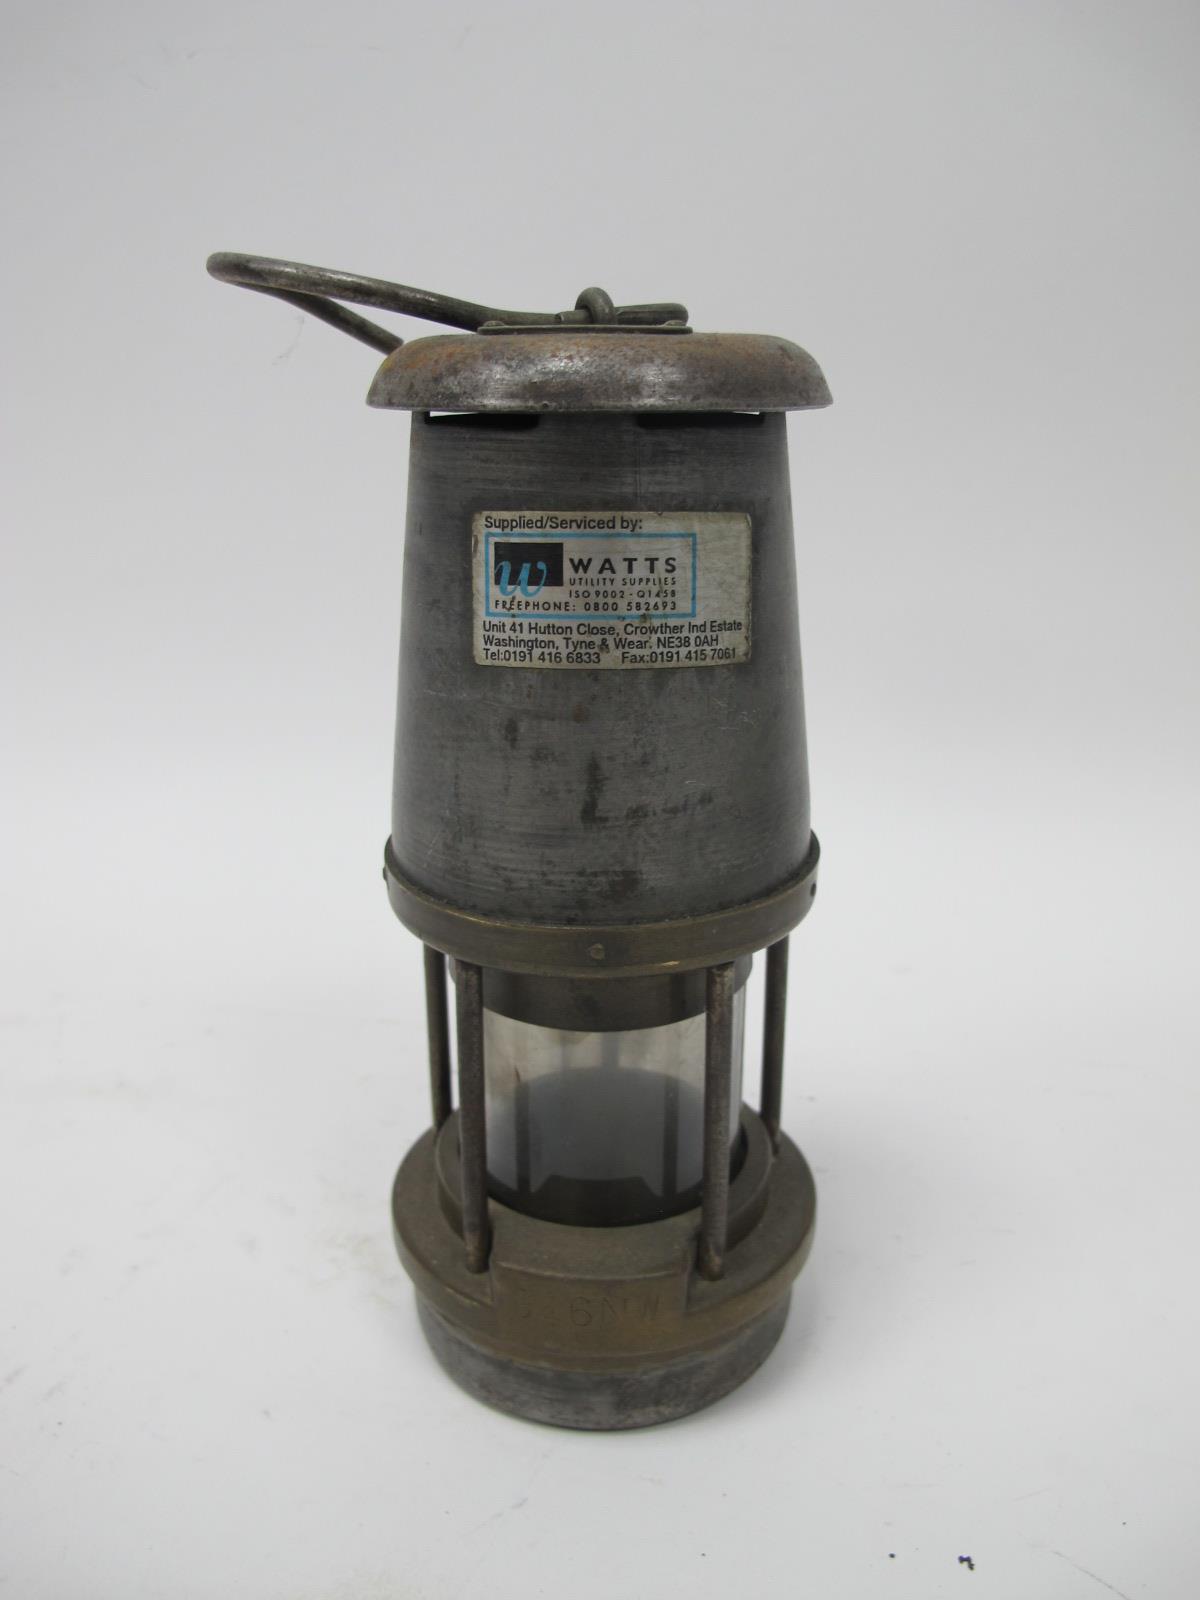 Miners Lamp, The Wolf Safety Lamp (Wm Maurice) Ltd, Sheffield, Wolf type FS to lower brass ring, P.O